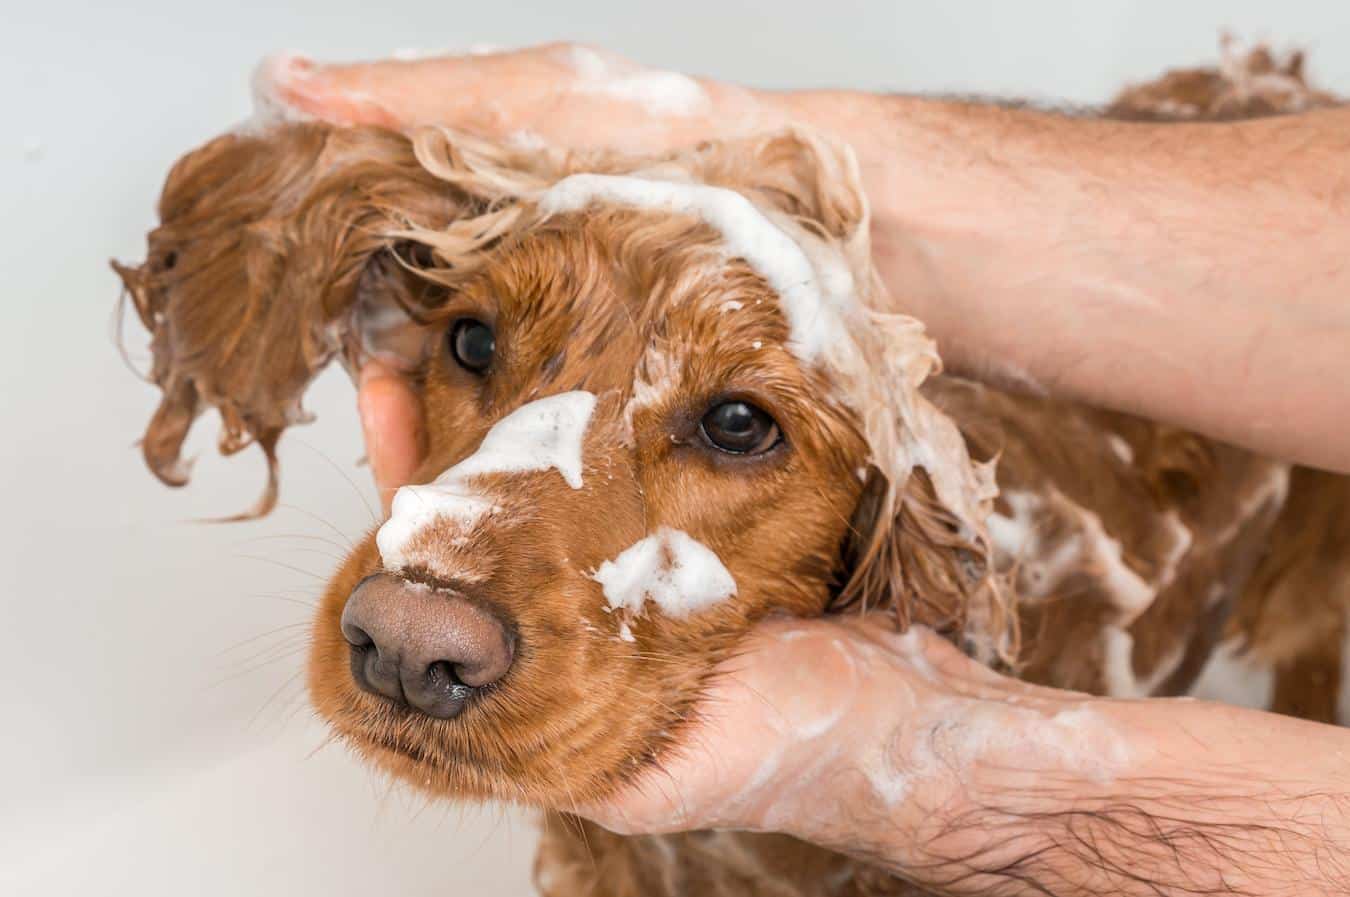 someone washing a dog skin problems health conditions bathing your dog depends